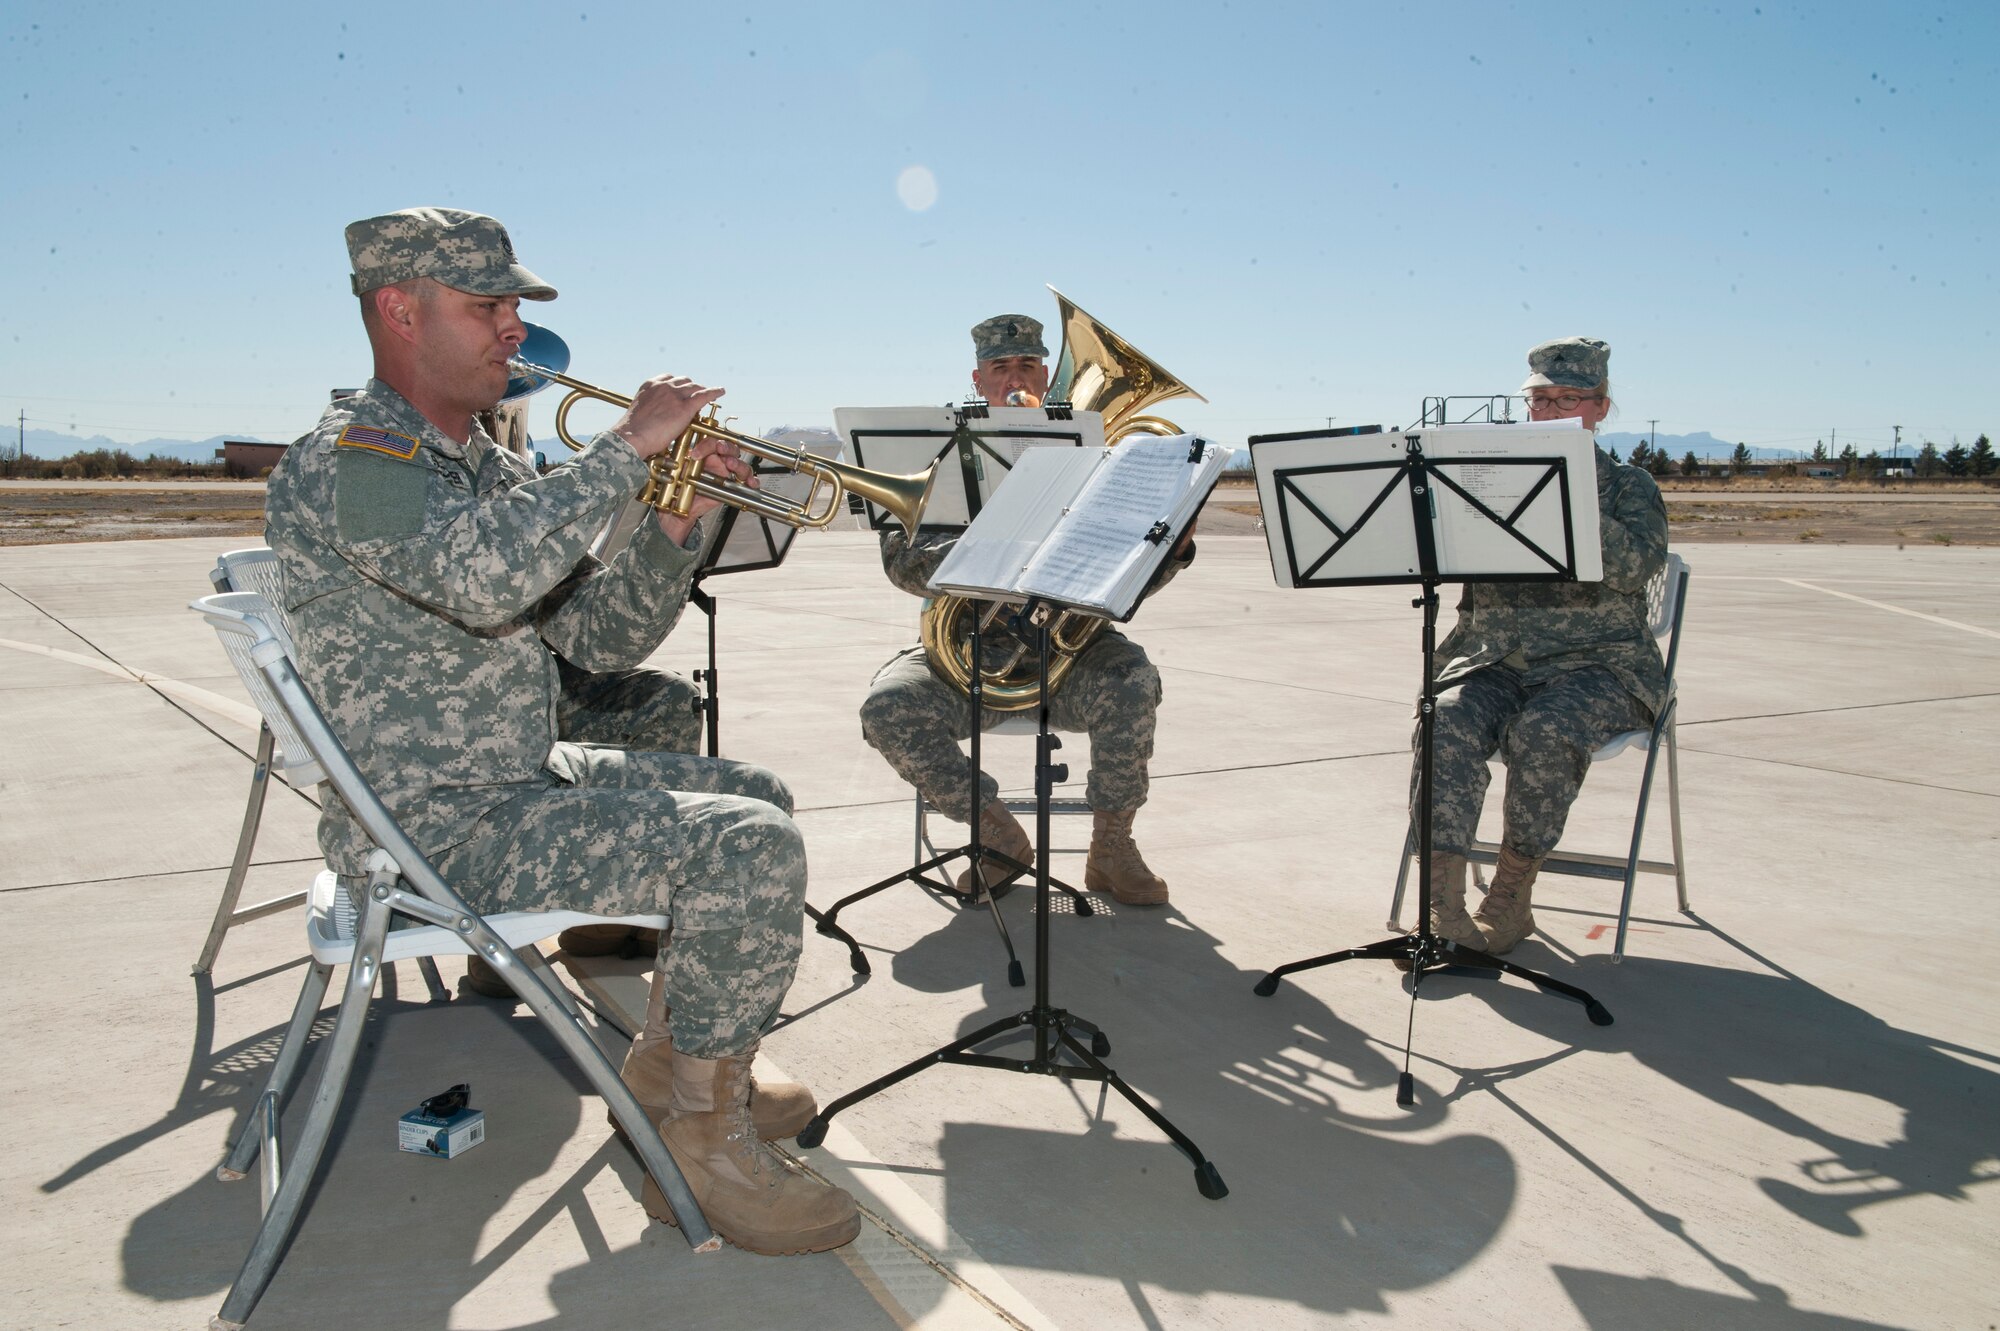 The 1st Armored Division, Band Brass Quintet from Fort Bliss, Texas, performs during the 54th Fighter Group activation ceremony at Holloman Air Force Base, N.M., March 11. The 54th Fighter Group, a tenant unit at Holloman, is a detachment the 56th Fighter Wing at Luke Air Force Base, Ariz., and will ultimately operate two F-16 Fighting Falcon aircraft training squadrons. The 54th Fighter Group plus three squadrons were activated at the ceremony: the 311th Fighter Squadron, the 54th Operations Support Squadron and the 54th Aircraft Maintenance Squadron. (U.S. Air Force photo by Senior Airman Daniel E. Liddicoet/Released)